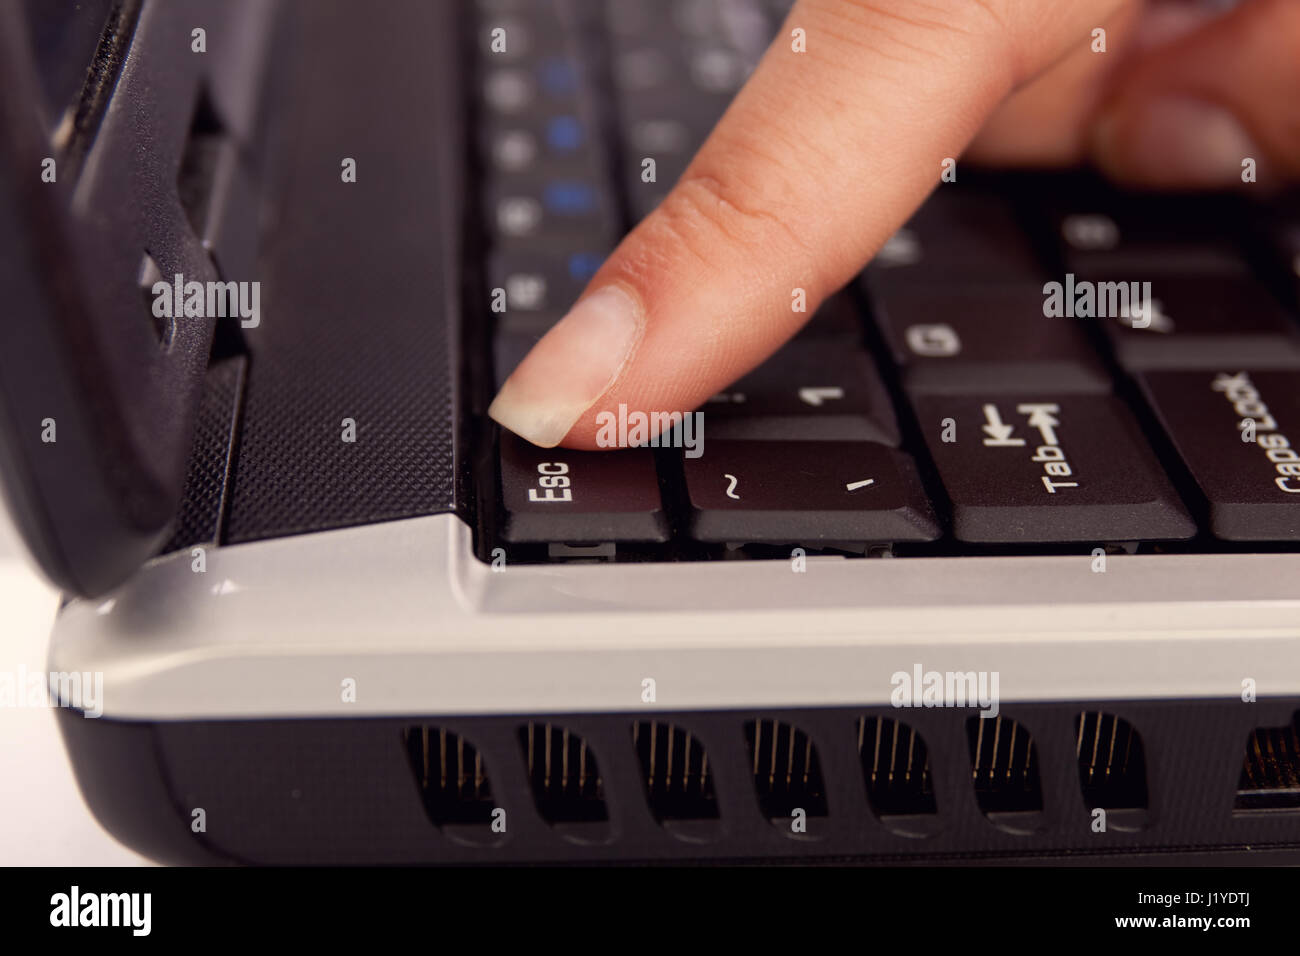 females finger pressing escape button on keyboard Stock Photo